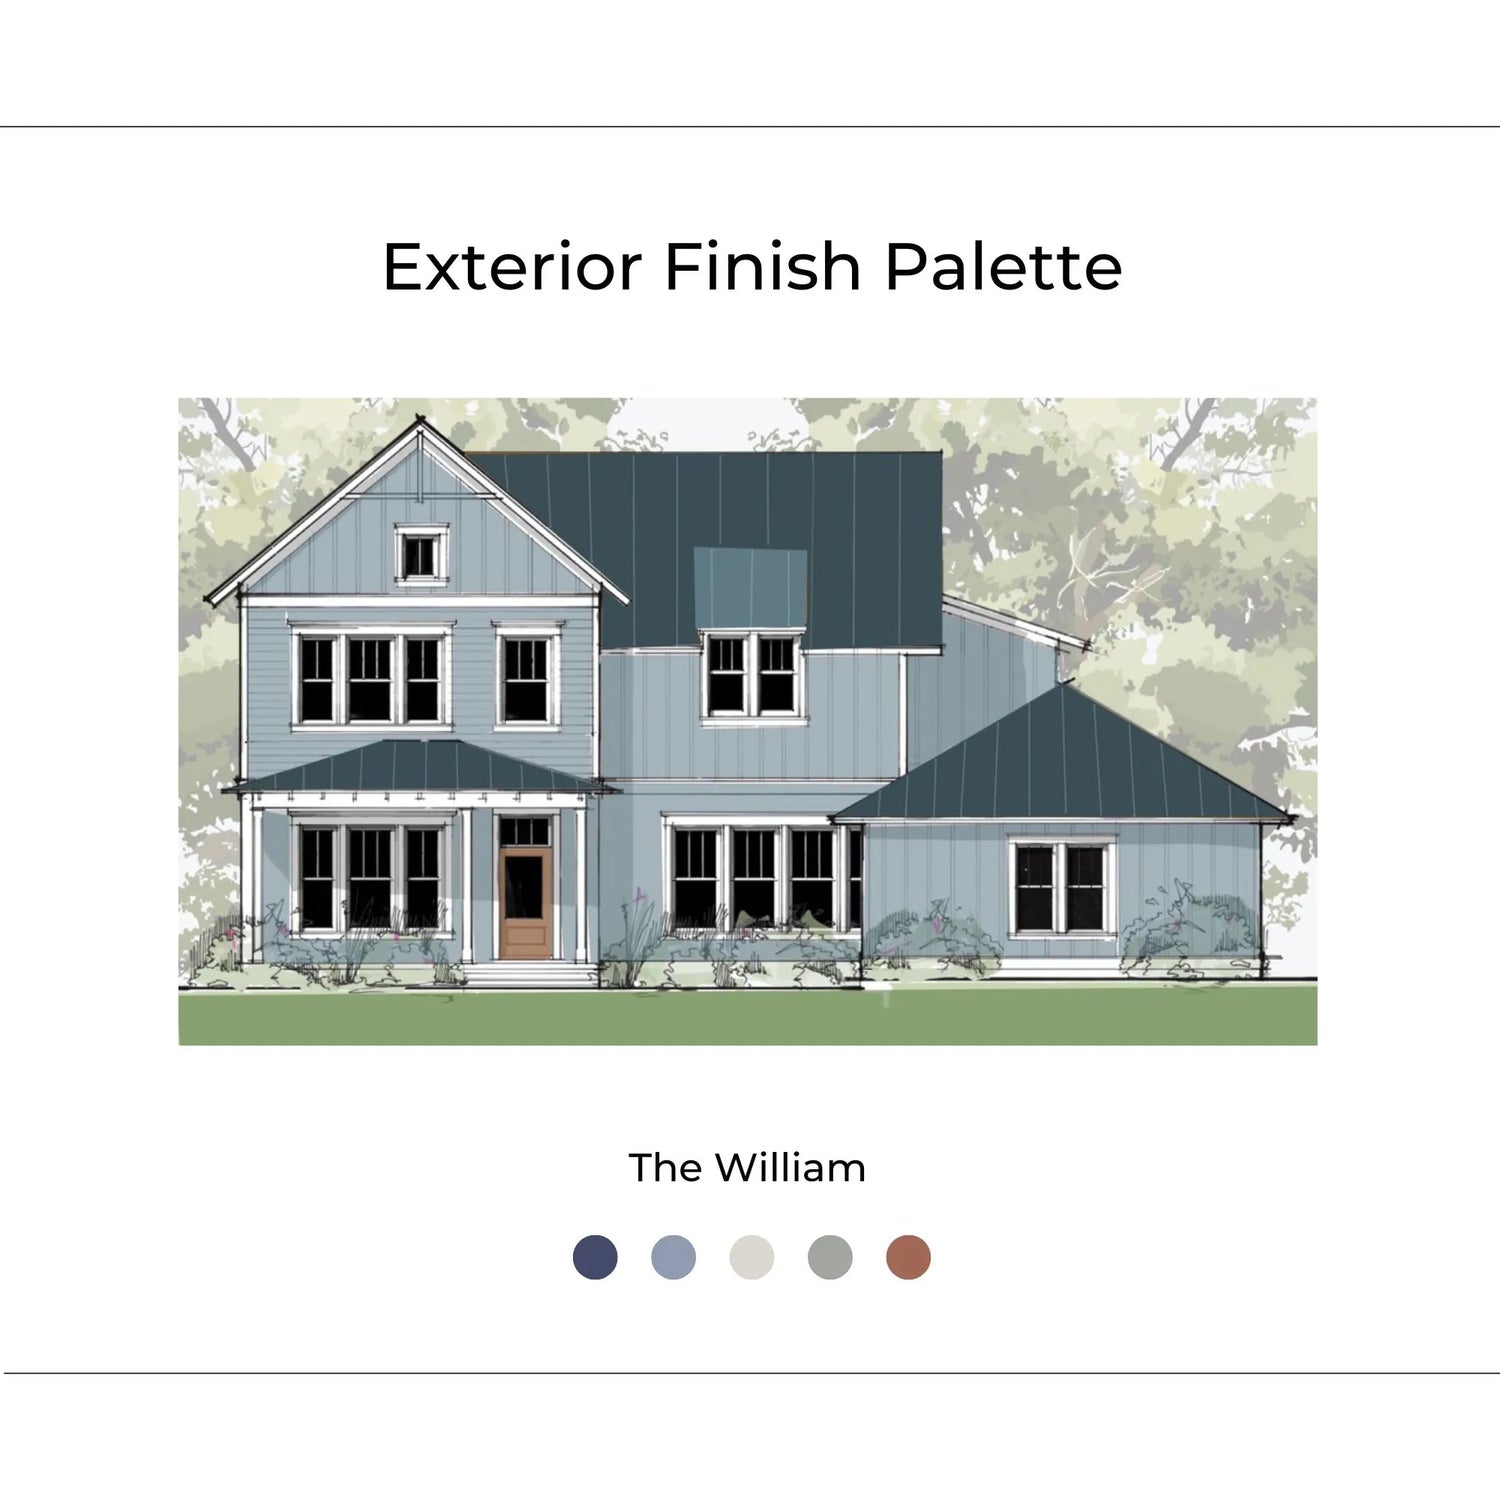 The William Exterior cover page with inspiration photos, renderings, materials, and design elements. The William is Timeless, Classic, Rustic, and Soft